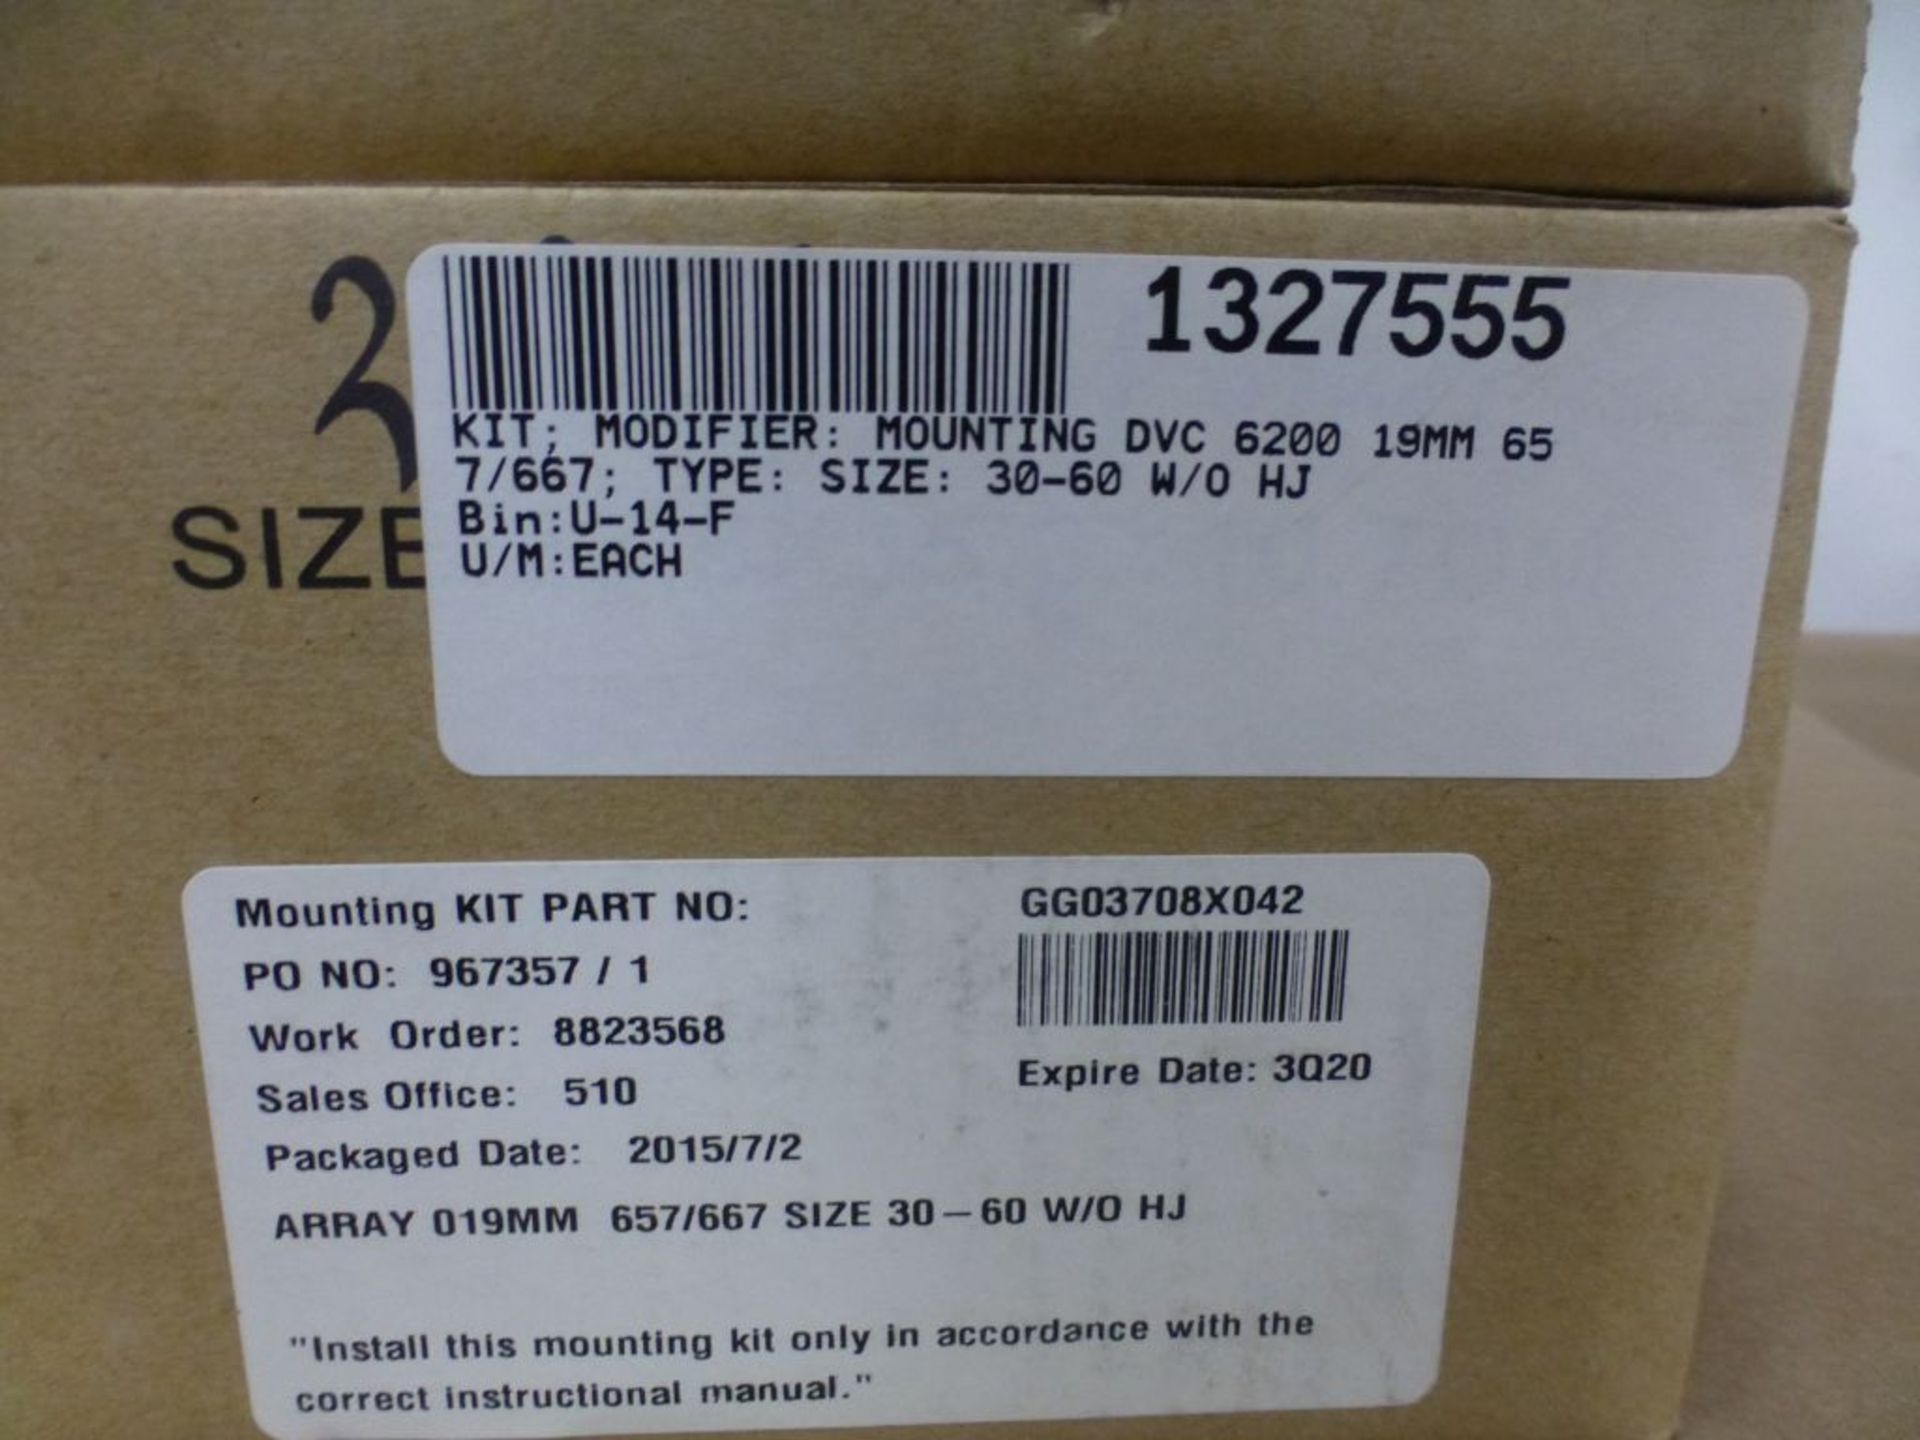 Lot of (11) Fisher Modifier Mounting Kits|Part No. GG03708X042|Lot Loading Fee: $5.00 - Image 23 of 23